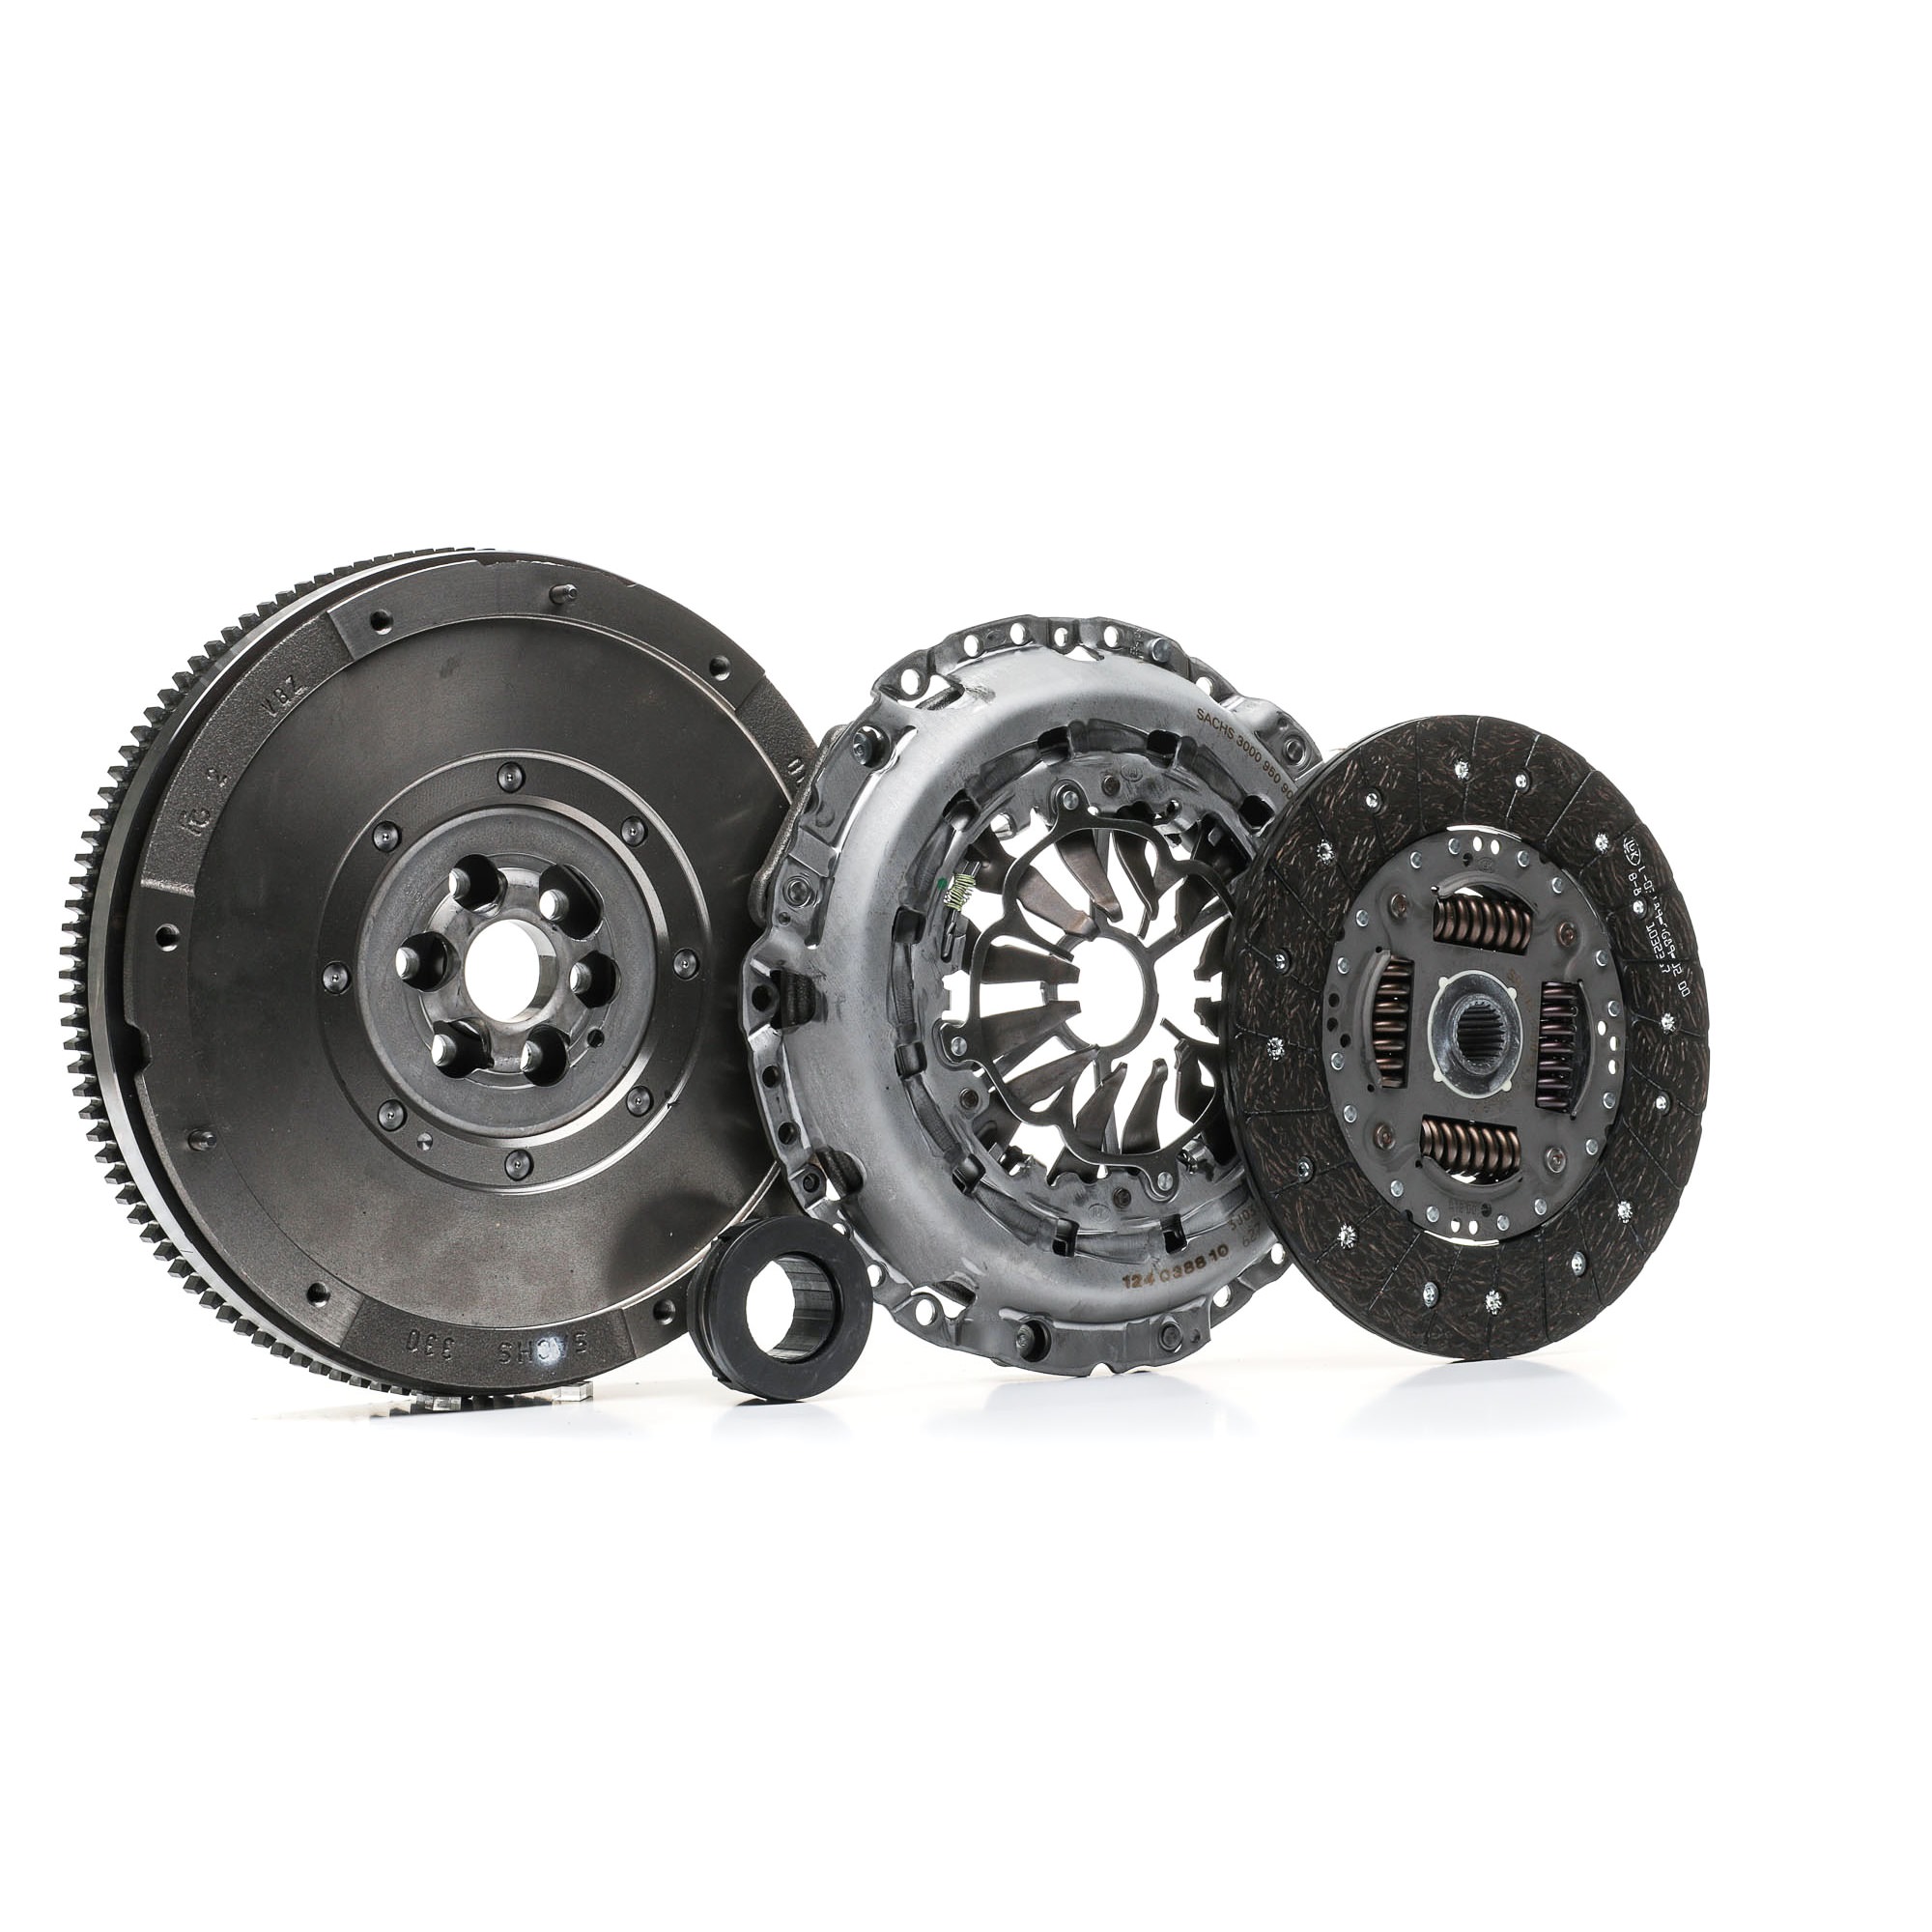 Audi A6 Complete clutch kit 9297846 SACHS 2290 601 093 online buy